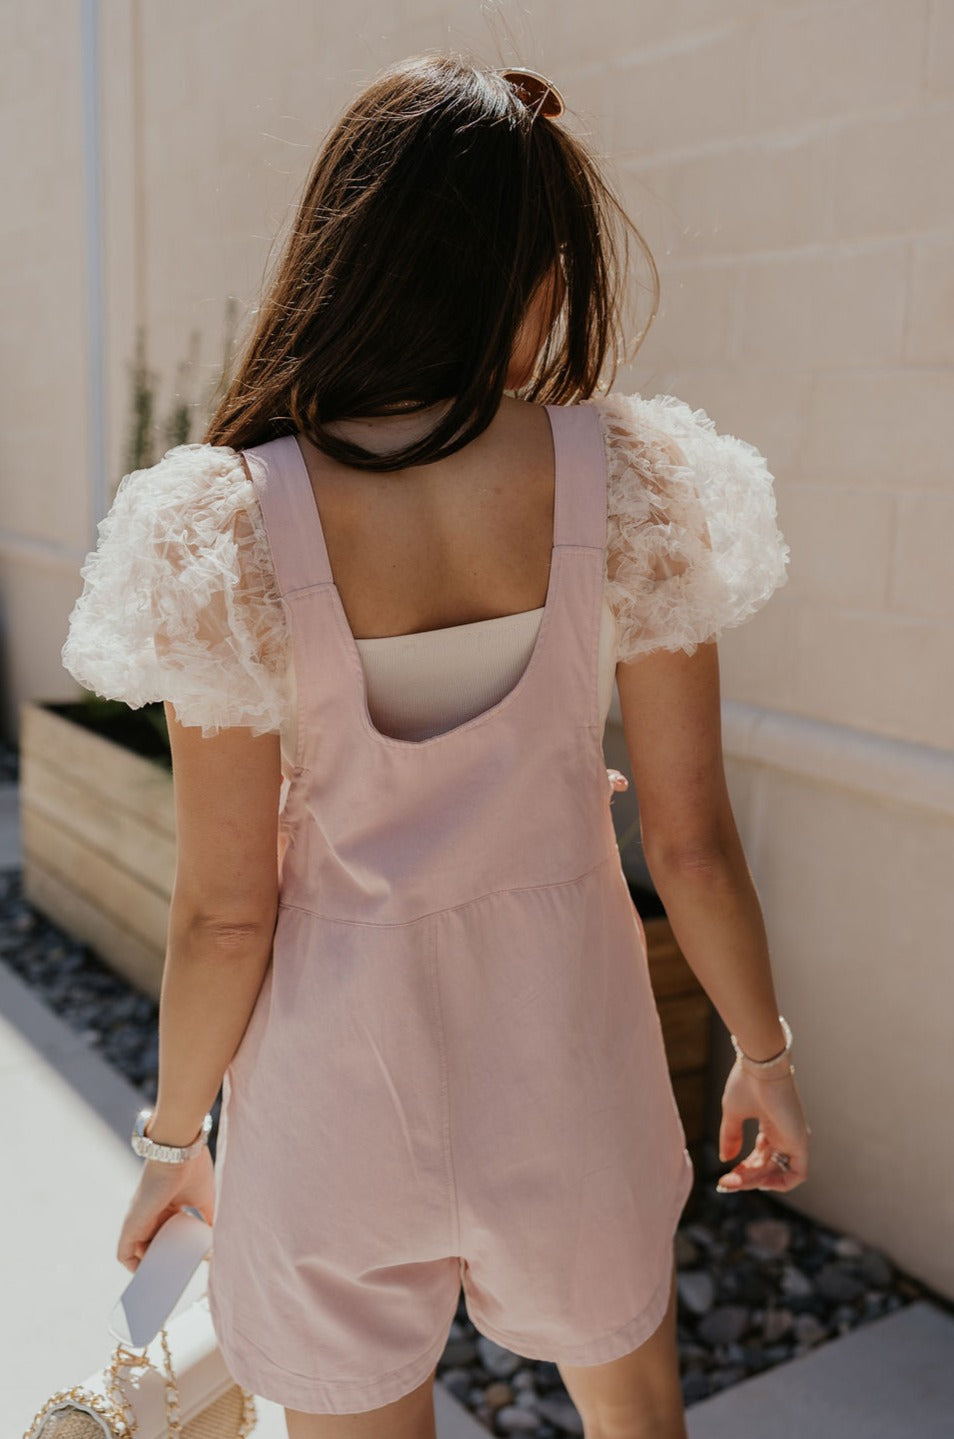 Back view of female model wearing the Selah Mauve Pink Sleeveless Romper which features Mauve Pink Lightweight Fabric, Pockets On Each Side, Slight Slit Details, Scoop Neckline, Straps with Wooden Button Closures and Sleeveless